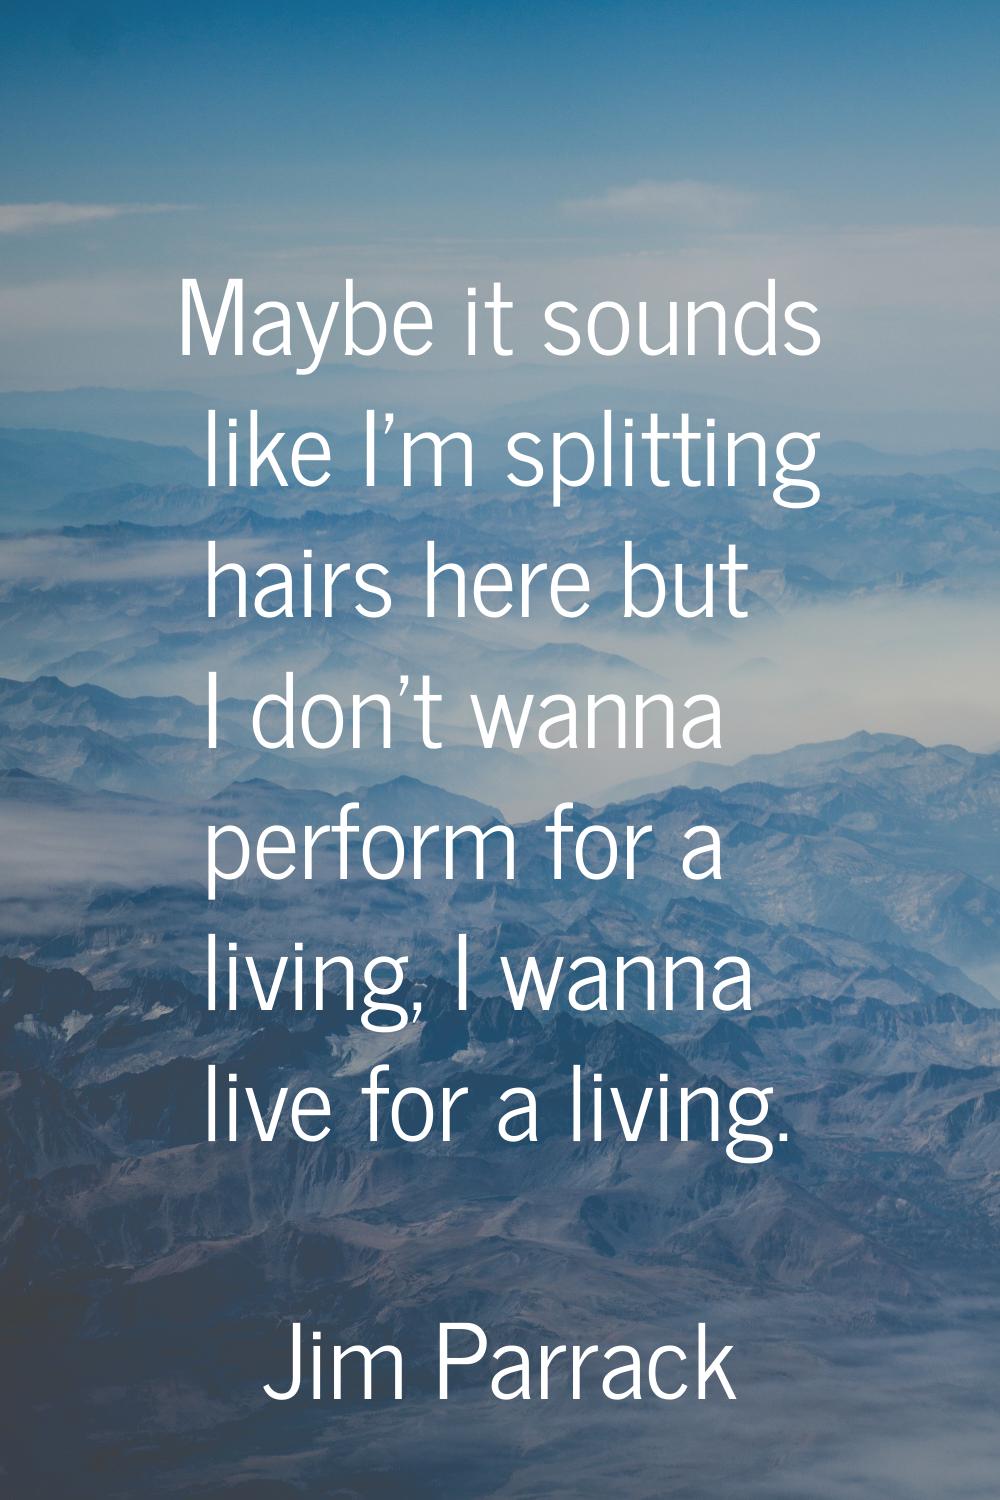 Maybe it sounds like I'm splitting hairs here but I don't wanna perform for a living, I wanna live 